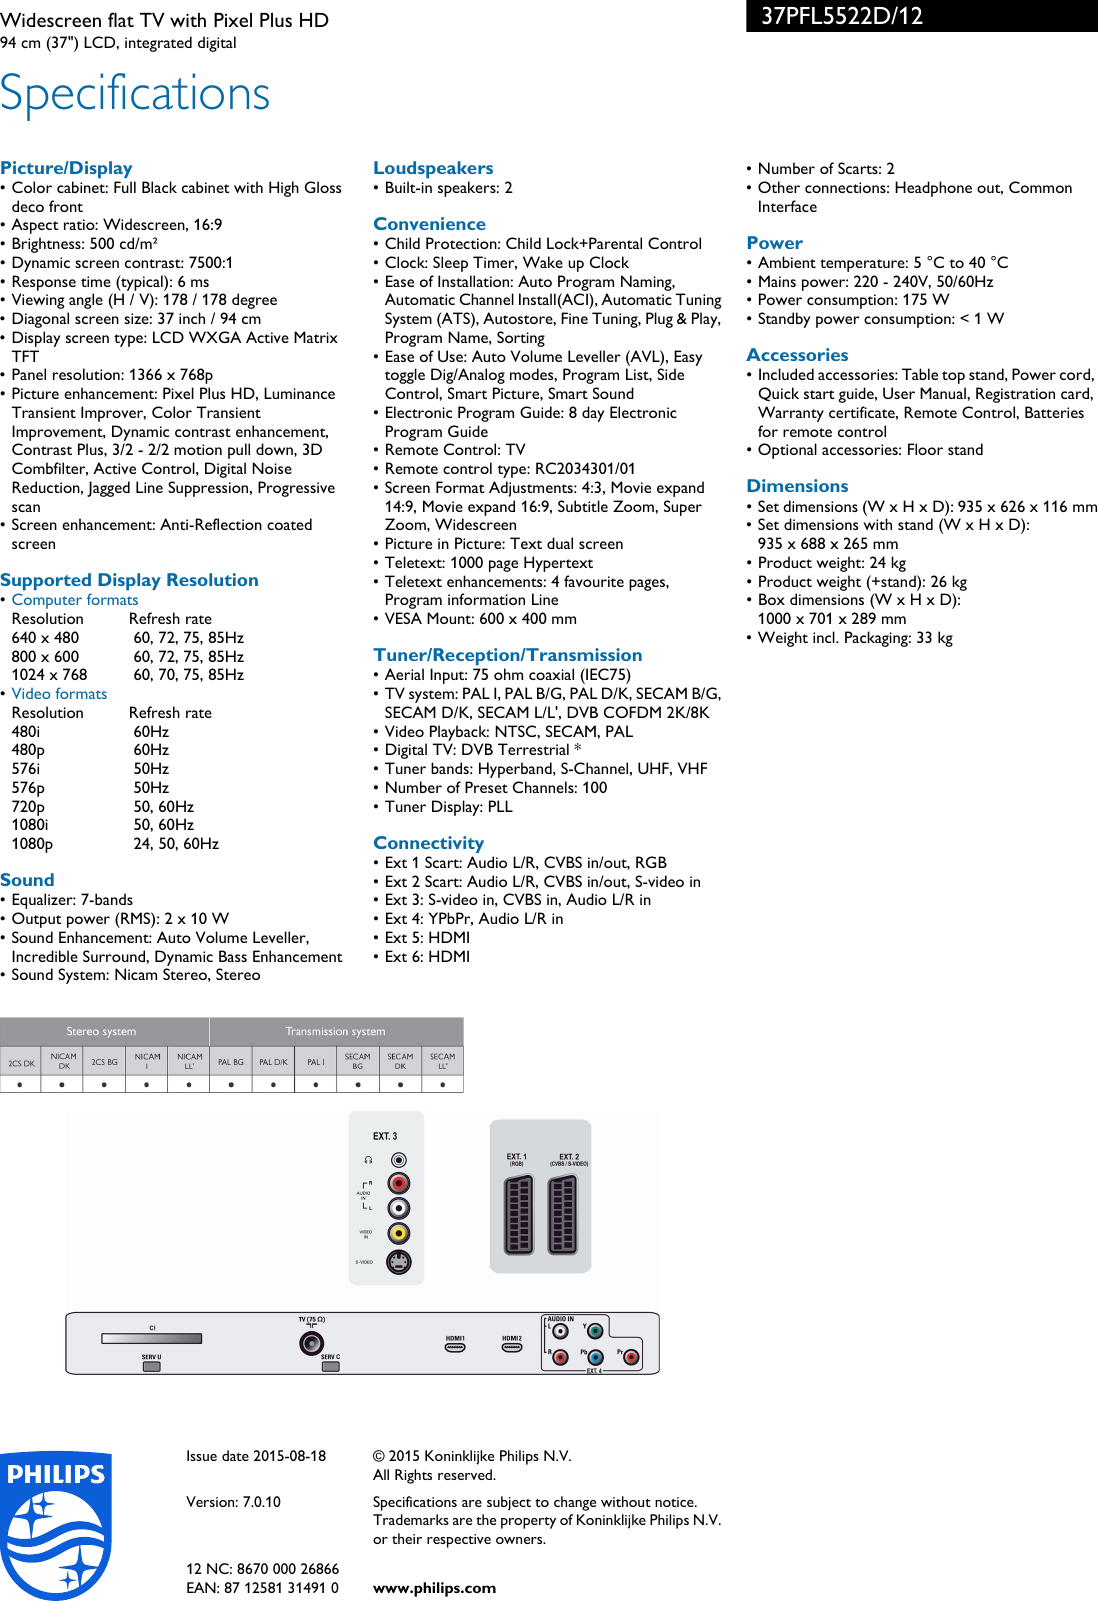 Page 3 of 3 - Philips 37PFL5522D/12 Widescreen Flat TV With Pixel Plus HD User Manual Esite 37pfl5522d 12 Pss